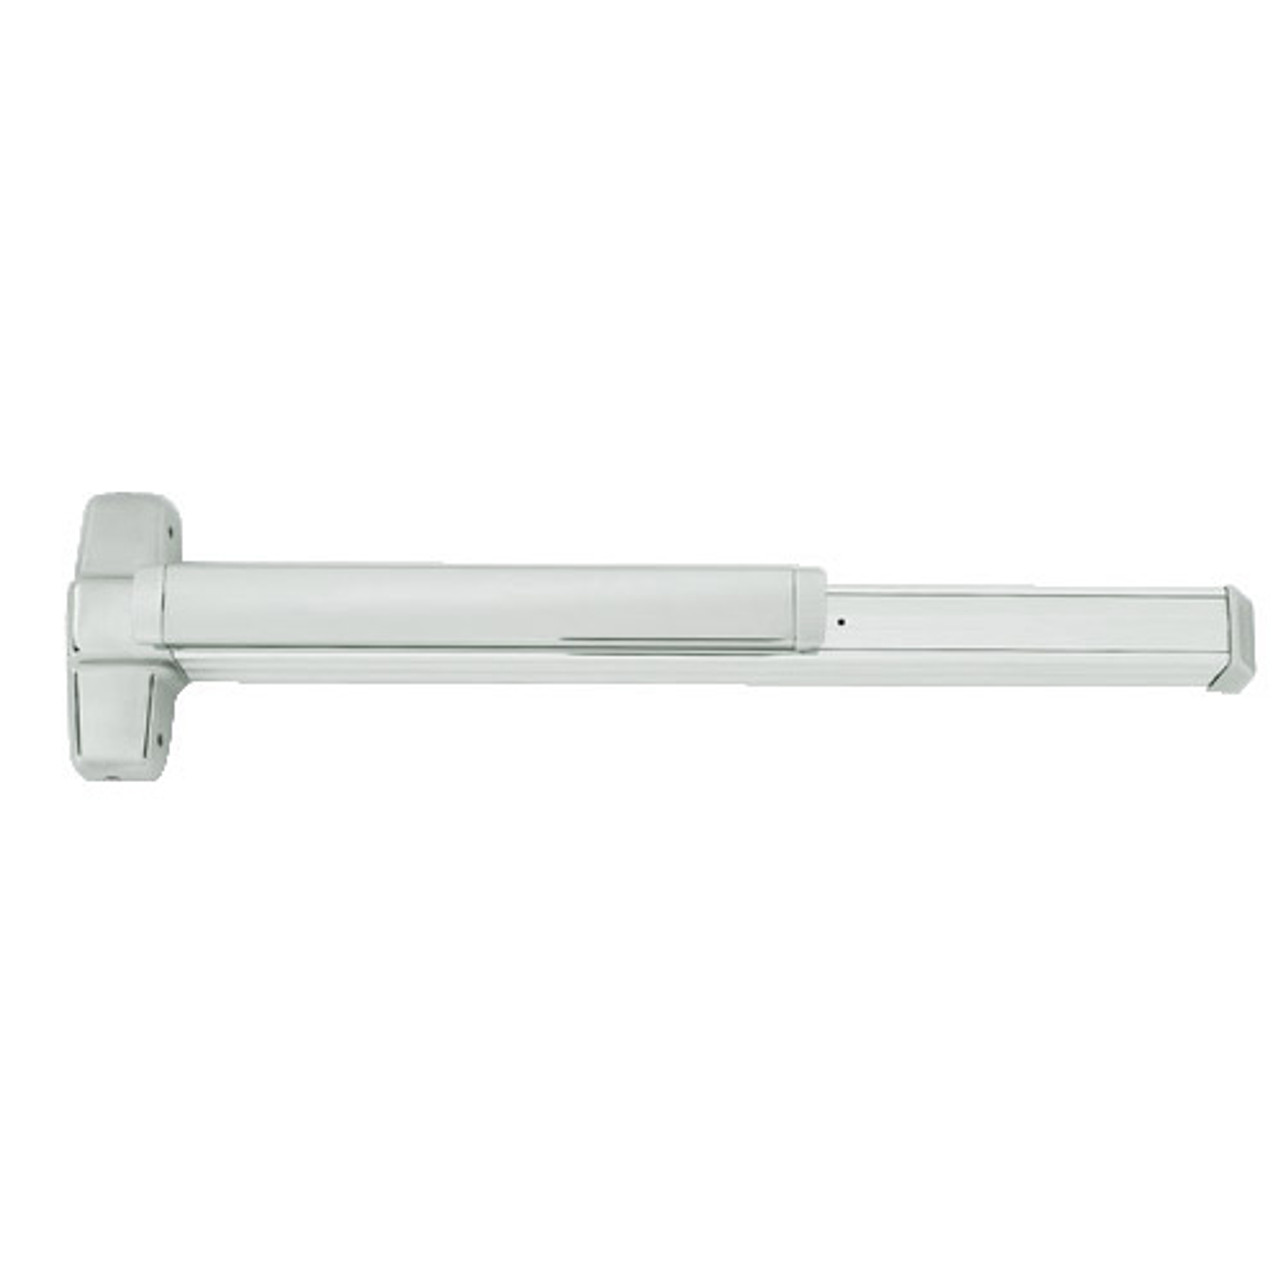 QEL9847WDC-EO-US26D-3 Von Duprin Exit Device with Quiet Electric Latch in Satin Chrome